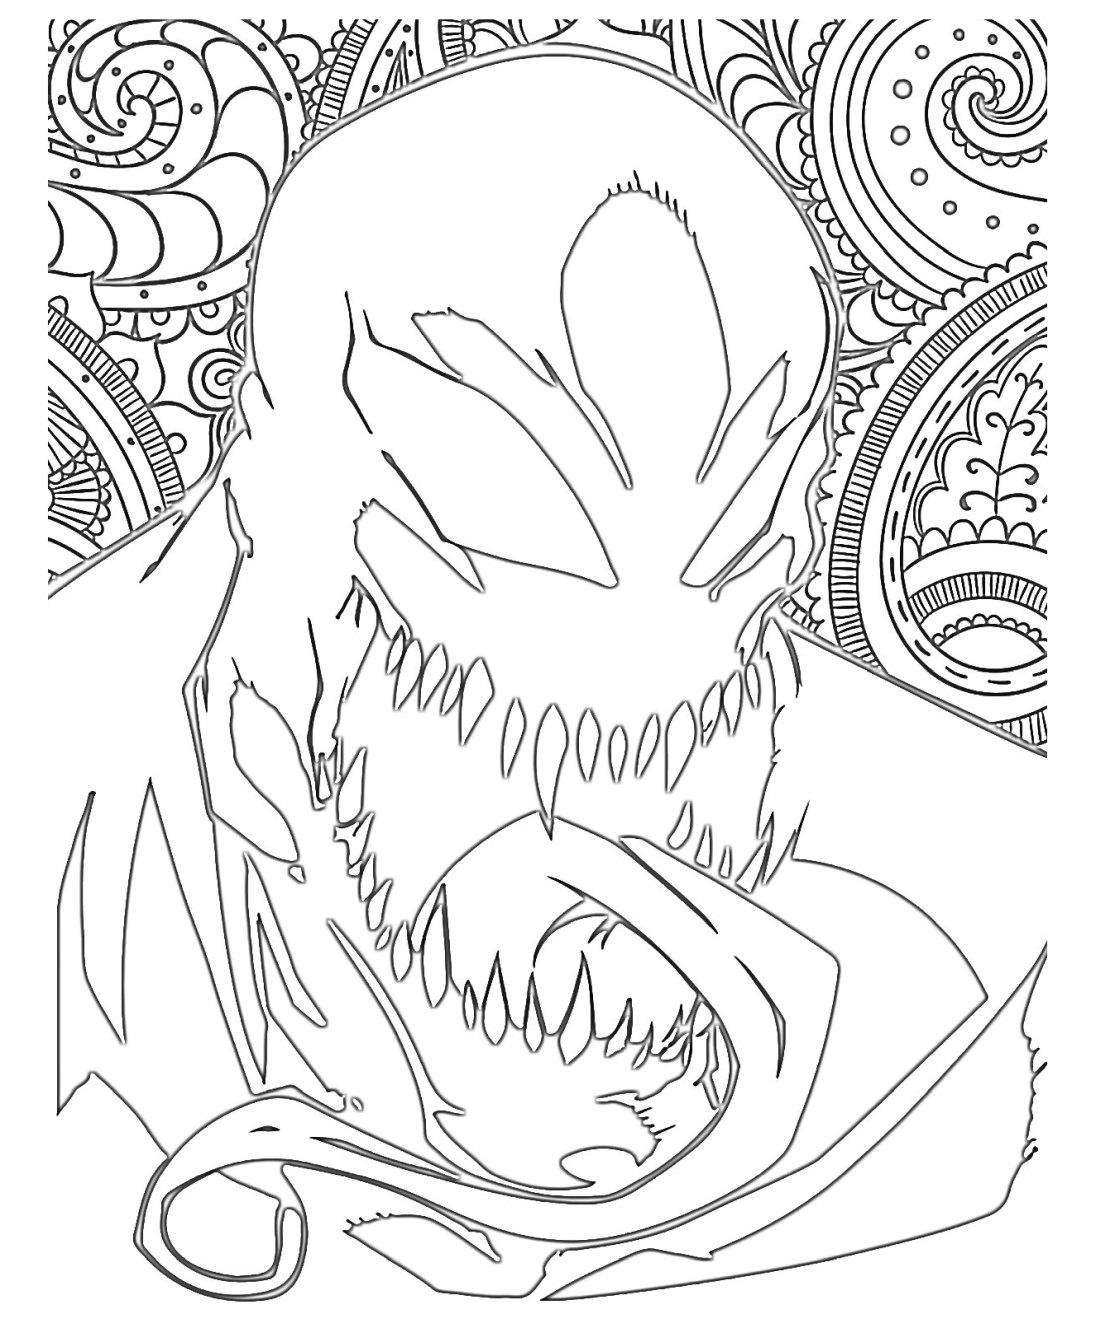 Poison creature coloring page